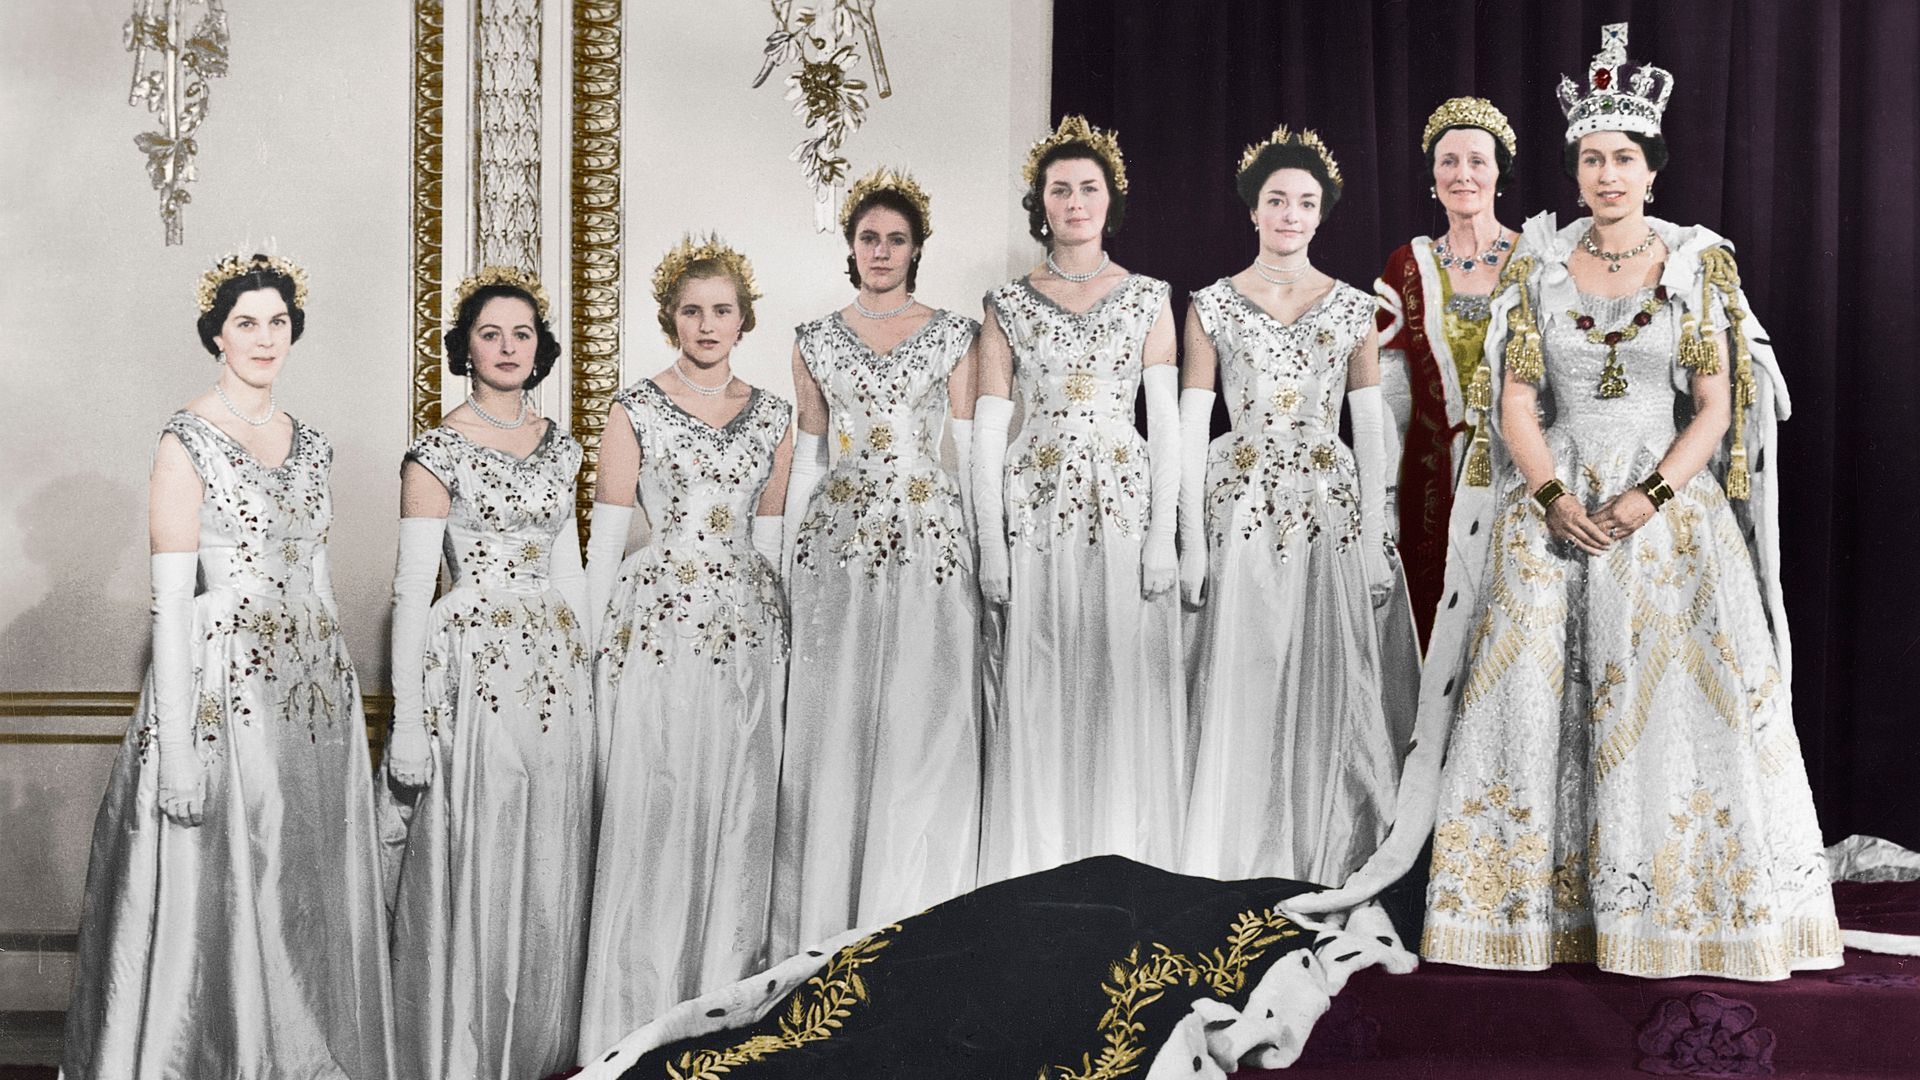 HM Queen Elizabeth II with her maids of honour, Green Drawing Room, Buckingham palace, 2nd June 1953. In selecting six Maids of Honour instead of pages to bear her velvet train throughout the Coronation ceremony, the Queen followed the precedent of Queen 